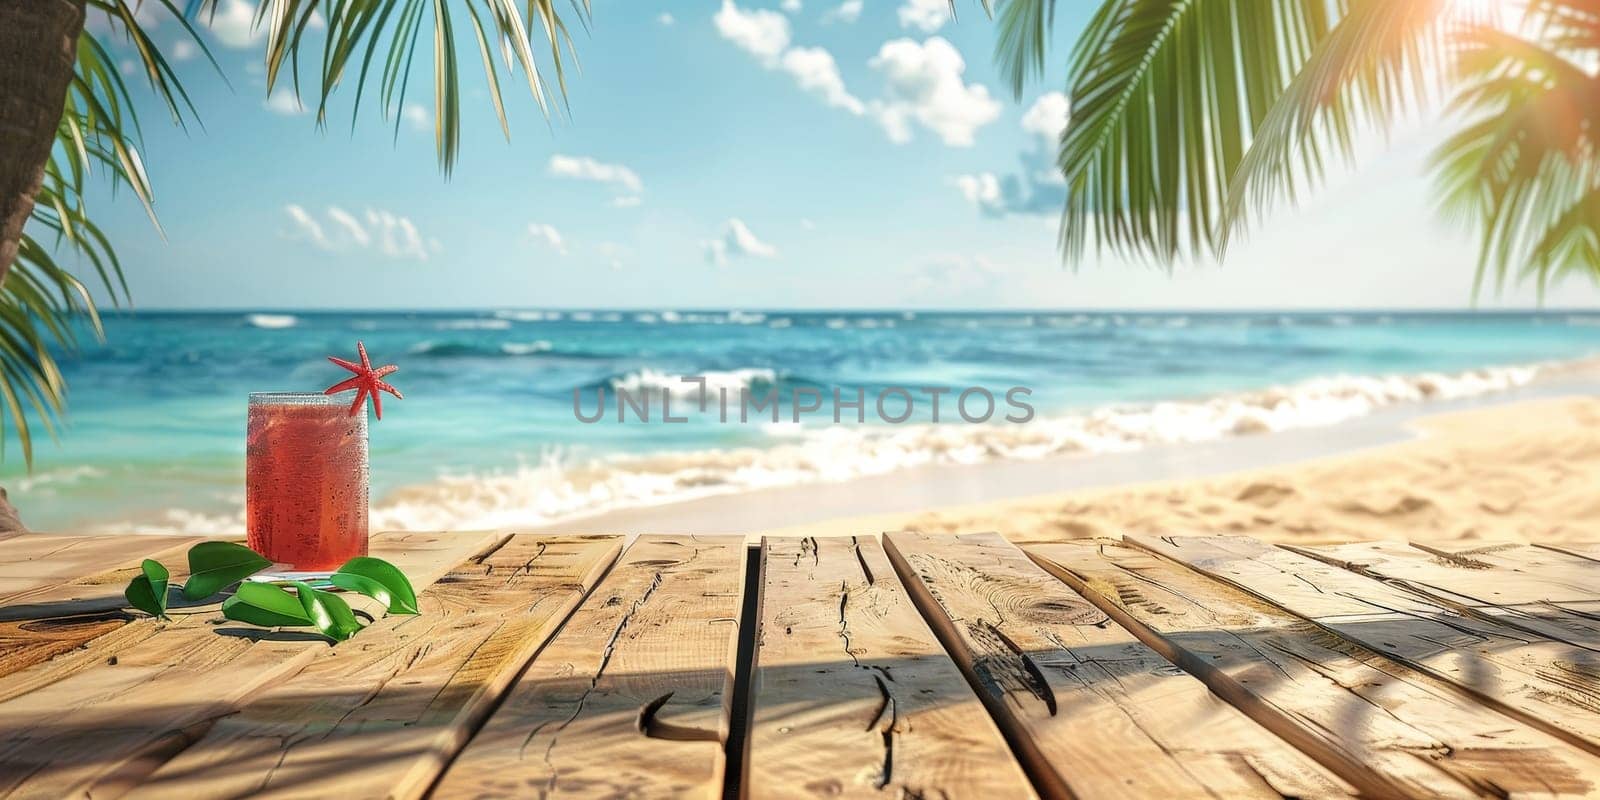 A beach scene with a drink on a table. The drink is a cocktail with a red garnish. The table is on a wooden board and is in front of the ocean. Scene is relaxed and carefree